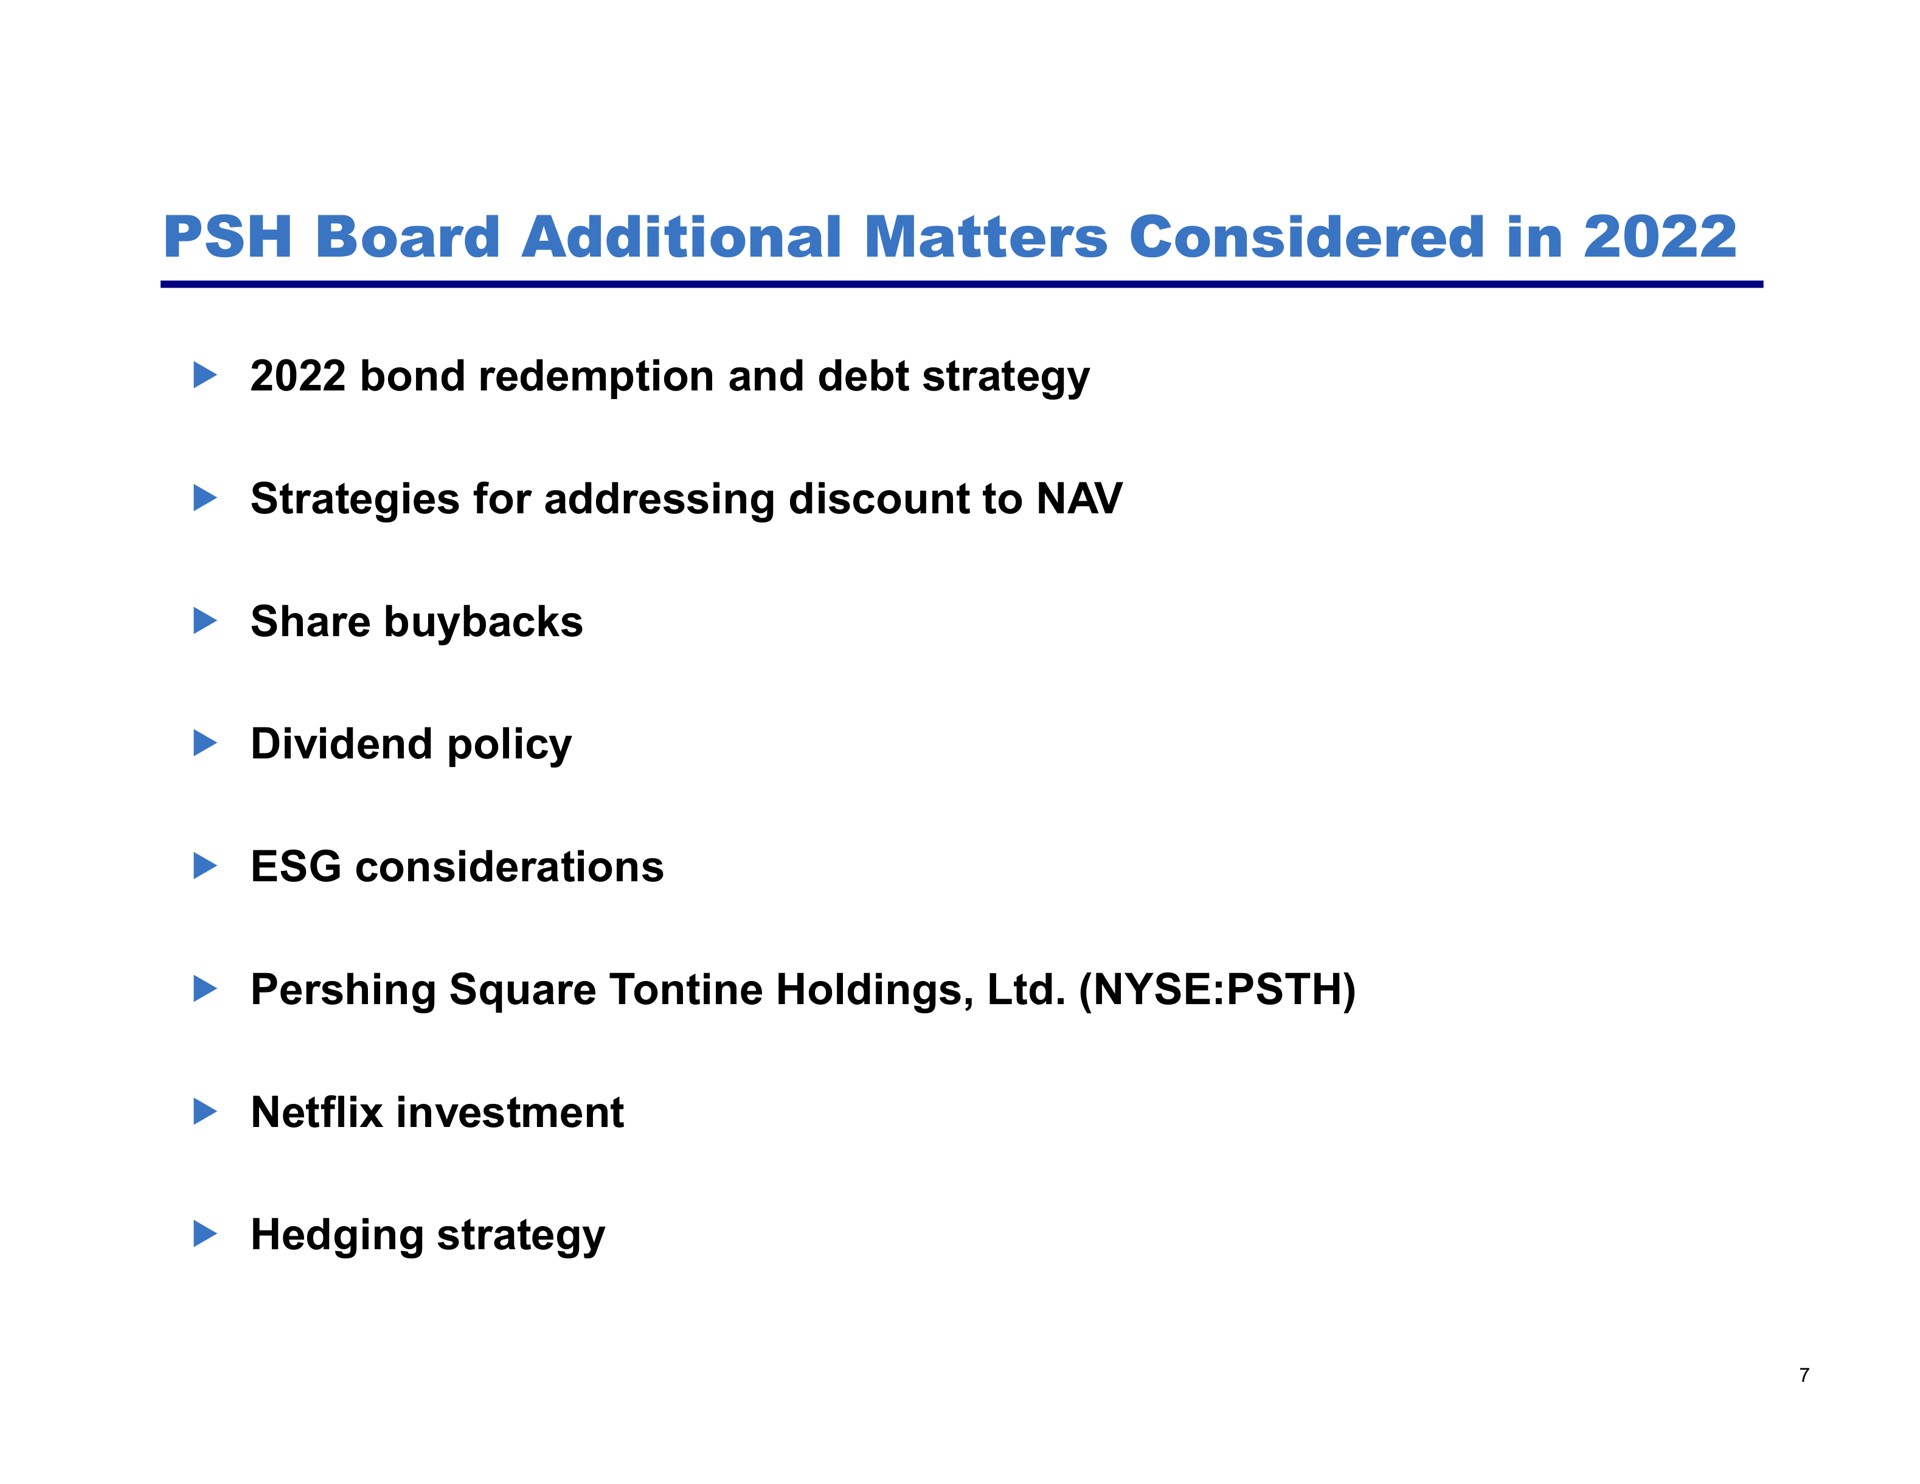 board additional matters considered in bond redemption and debt strategy strategies for addressing discount to share dividend policy considerations square tontine holdings investment hedging strategy | Pershing Square